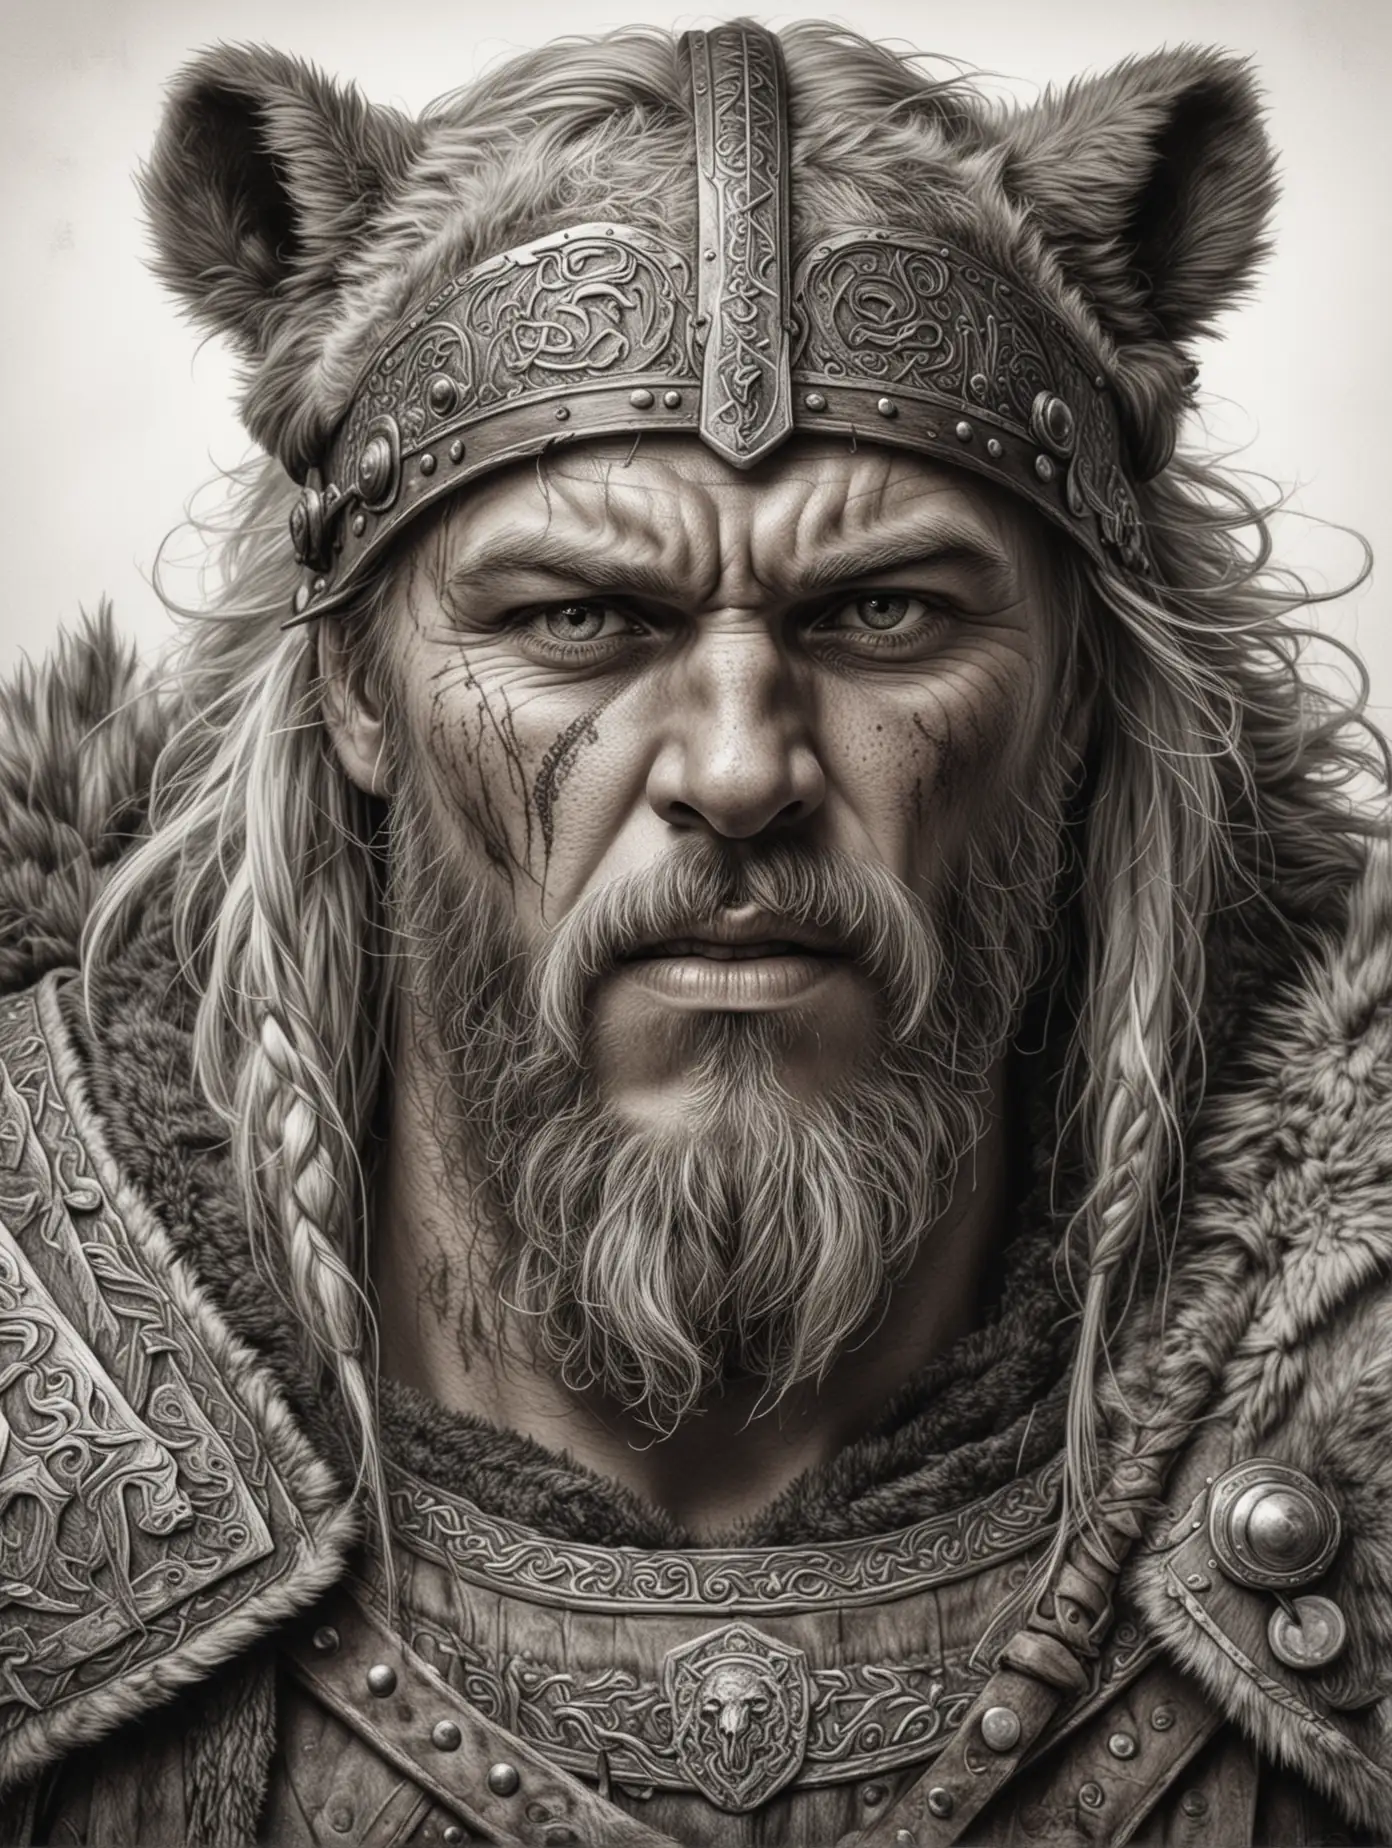 Realistic-Viking-Warrior-with-Roaring-Bear-in-Pencil-Drawing